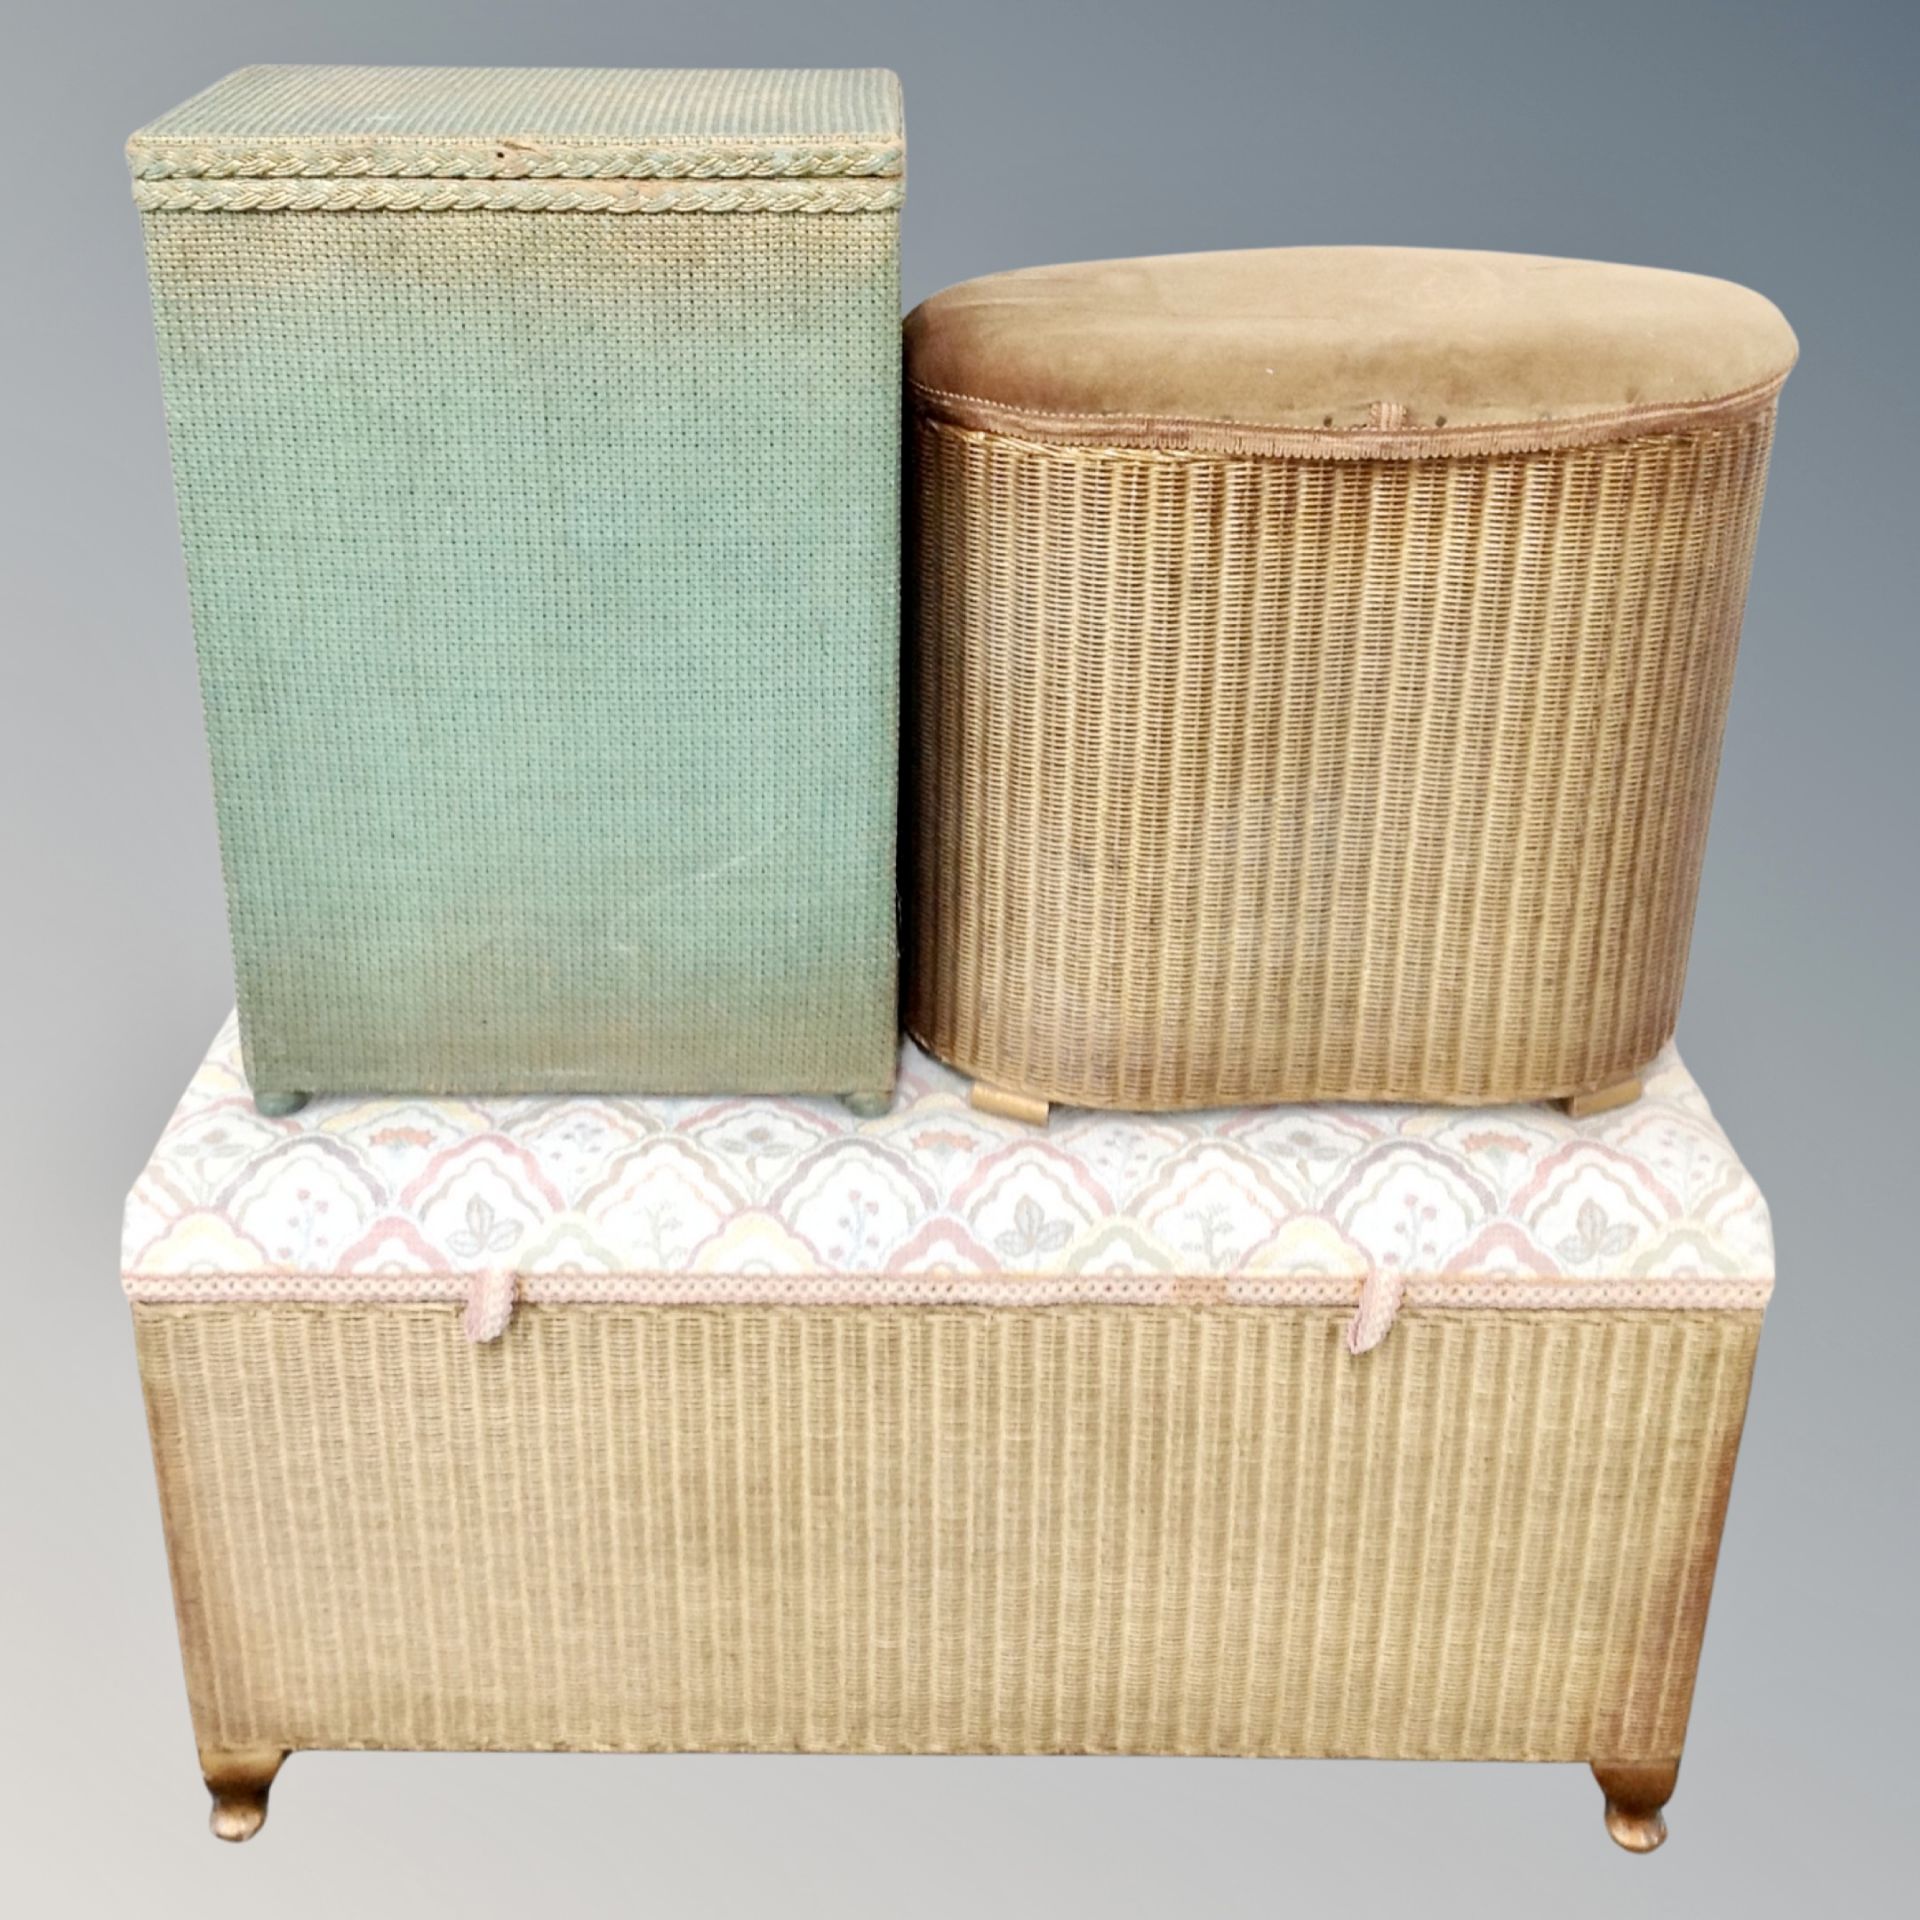 A 20th century gold loom blanket box together with a further loom storage stool and a linen box